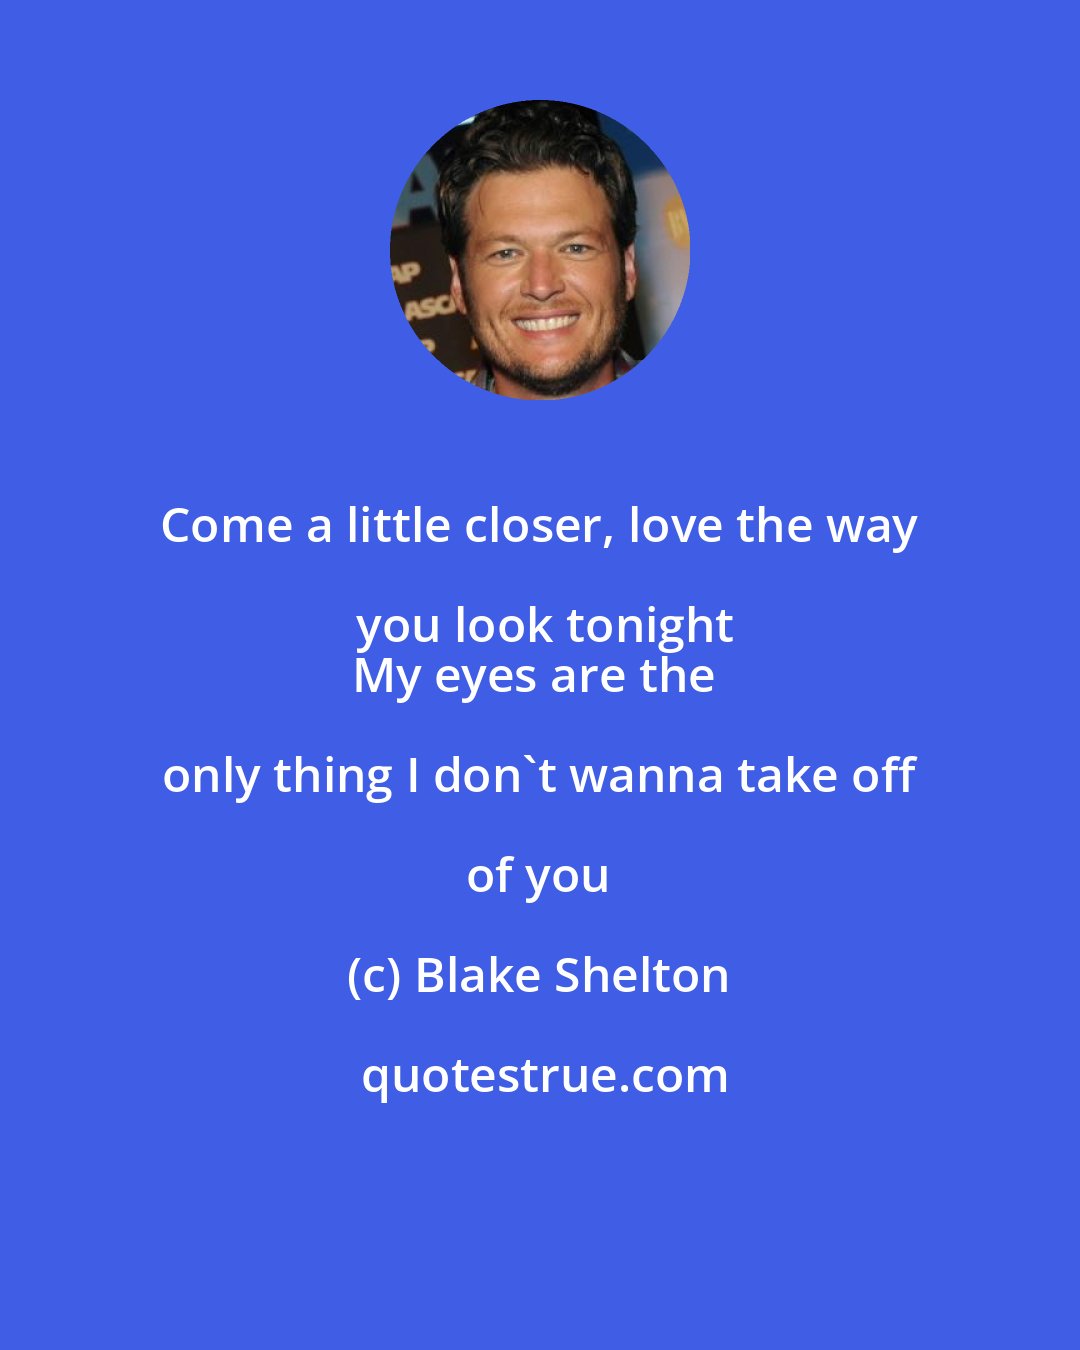 Blake Shelton: Come a little closer, love the way you look tonight
My eyes are the only thing I don't wanna take off of you